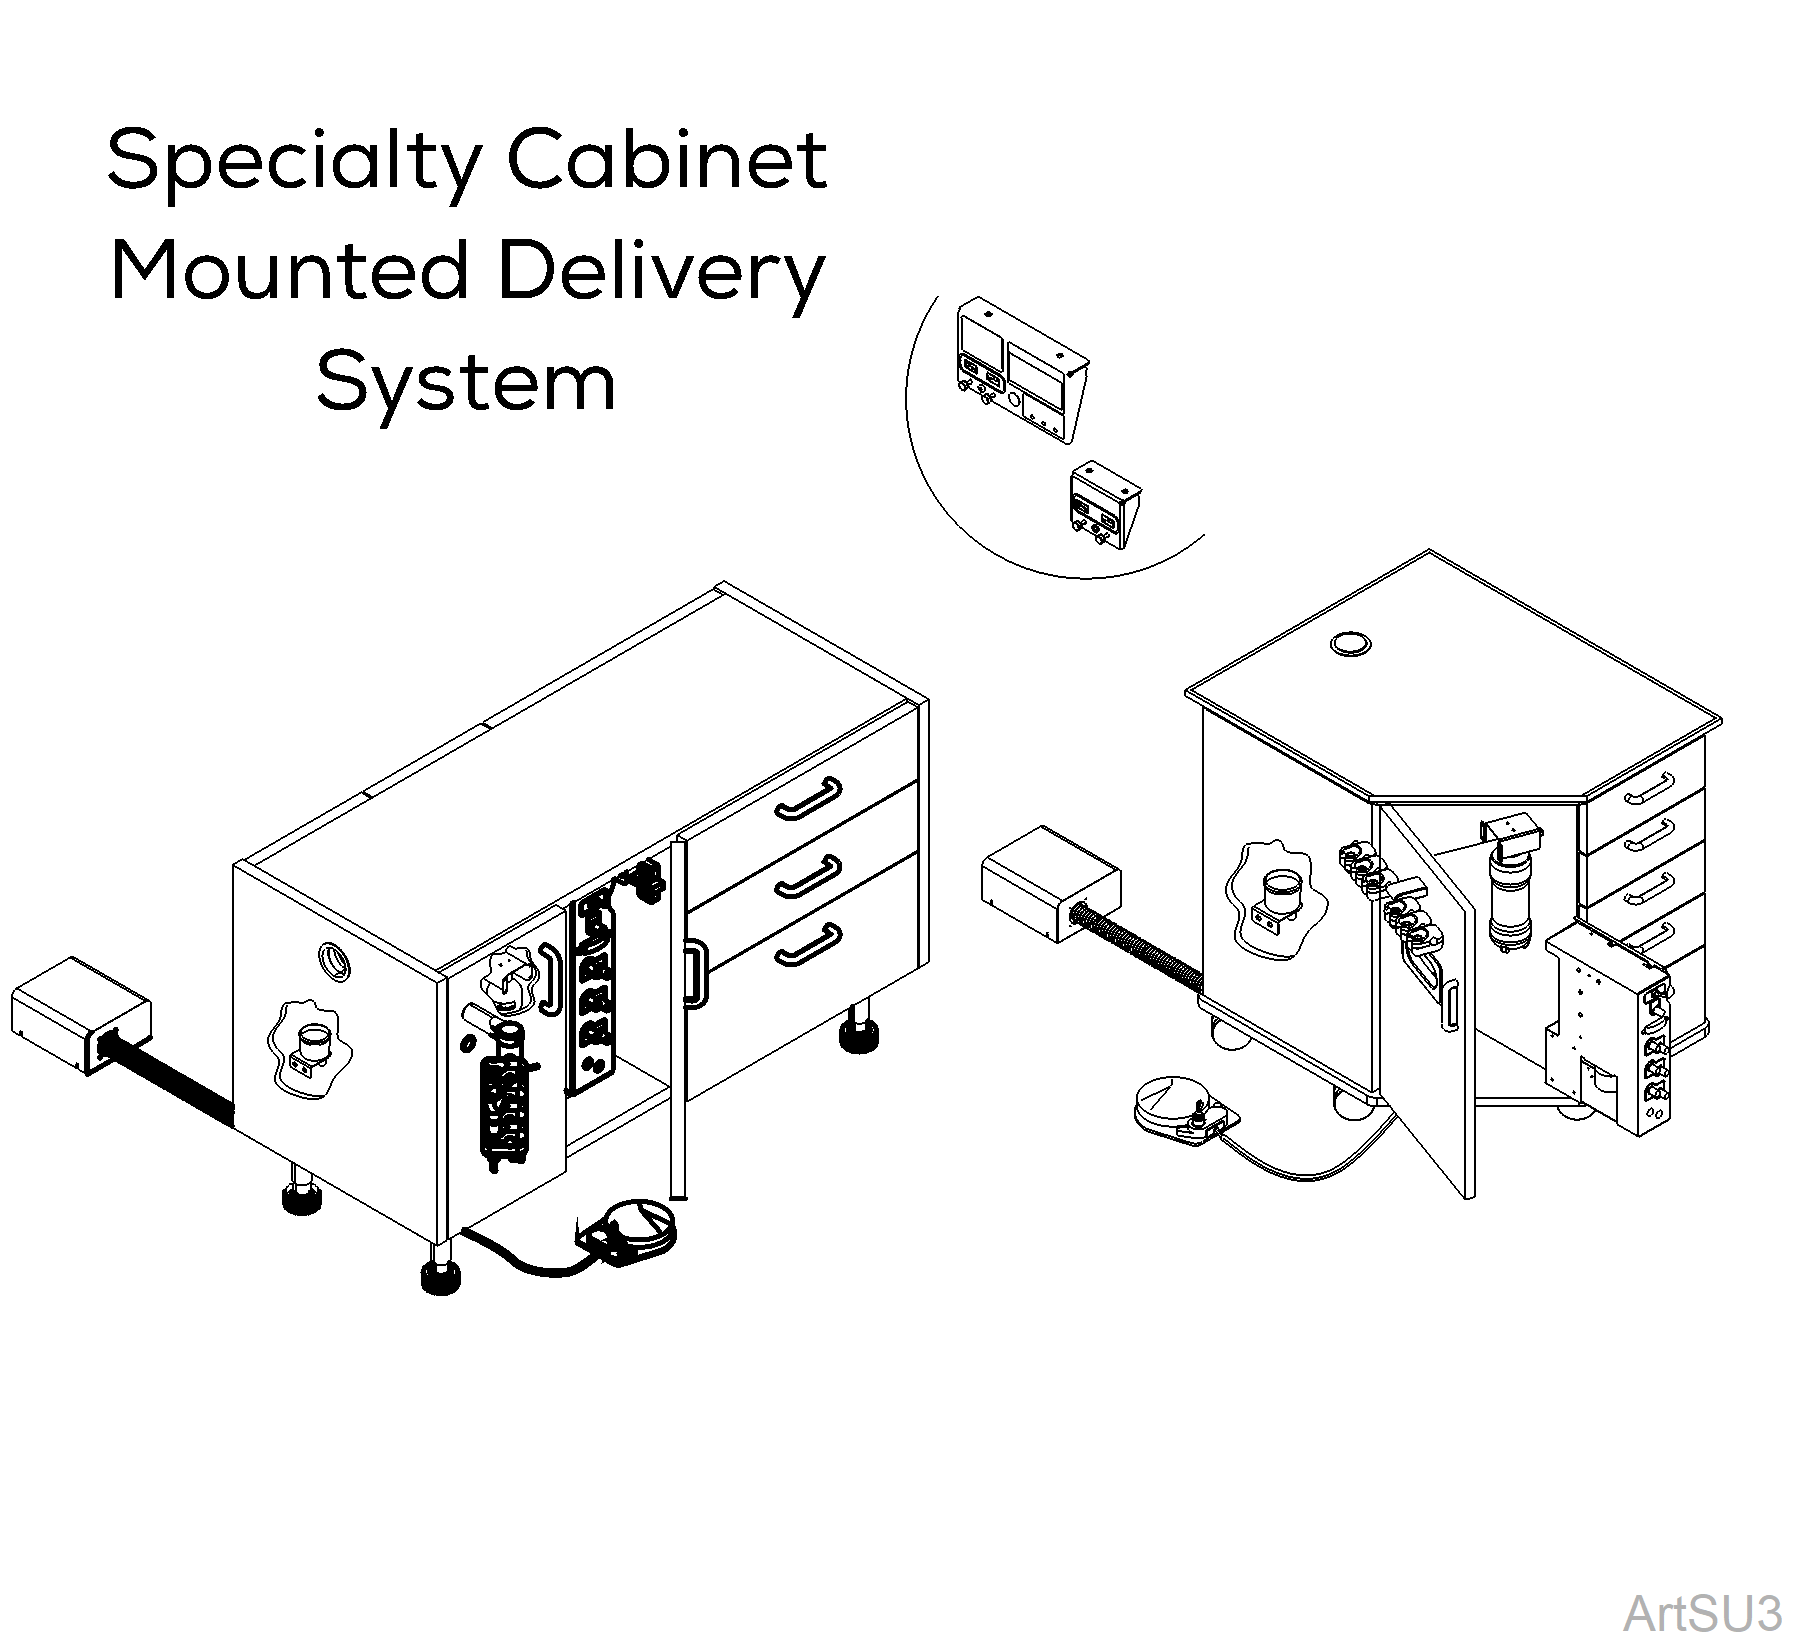 Specialty Cabinet Mounted Procenter Delivery System